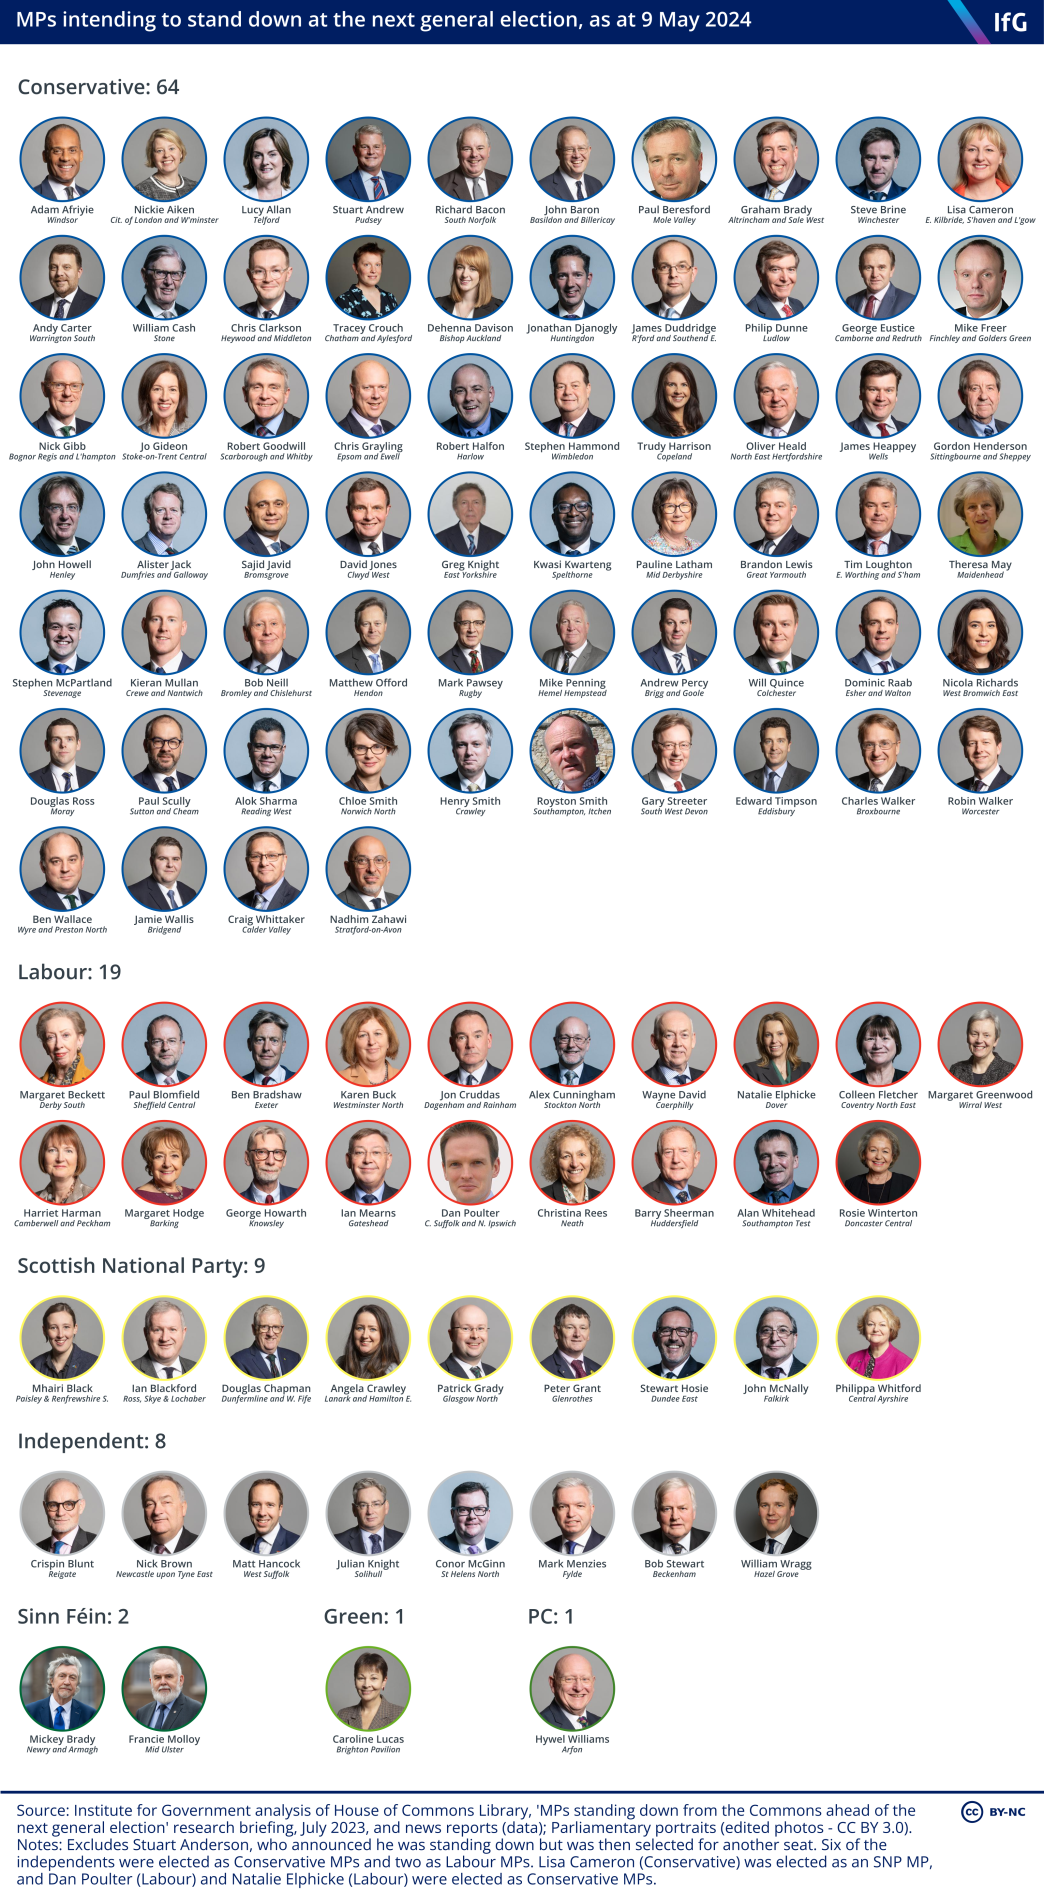 An Institute for Government graphic showing MPs intending to stand down at the next general election, as at 9 May 2024, where there are 104 MPs standing down in total, including 64 Conservative and 19 Labour MPs, and featuring people such as Theresa May, Dominic Raab and Matt Hancock.